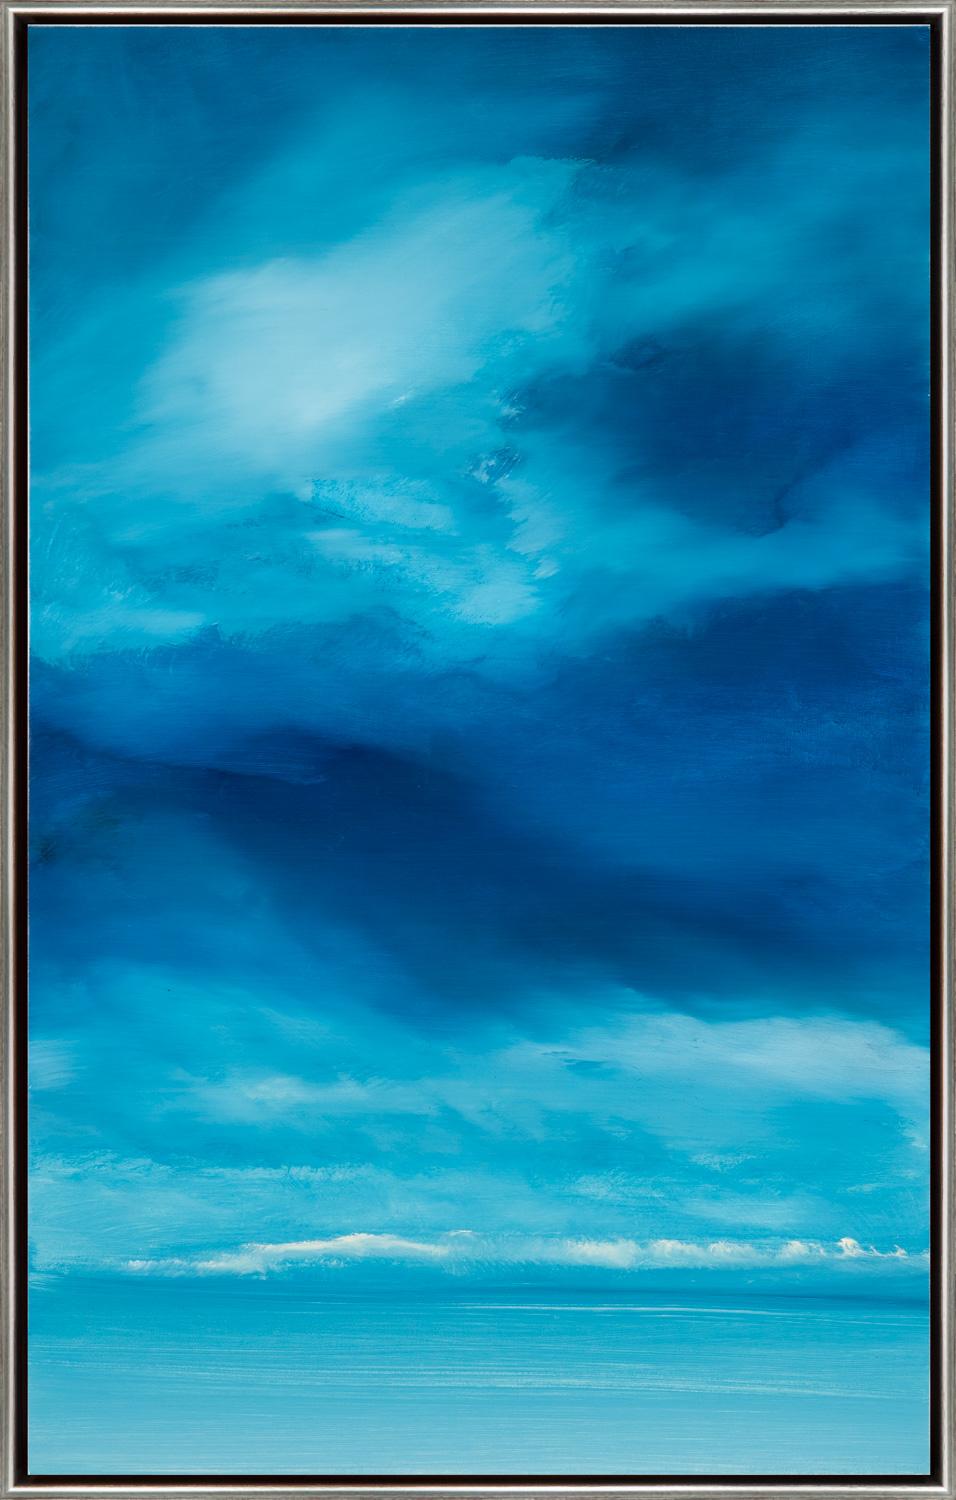 Charlie Bluett Landscape Painting - "As I Stare Out to Sea" Contemporary Seascape Landscape Framed Acrylic on Canvas